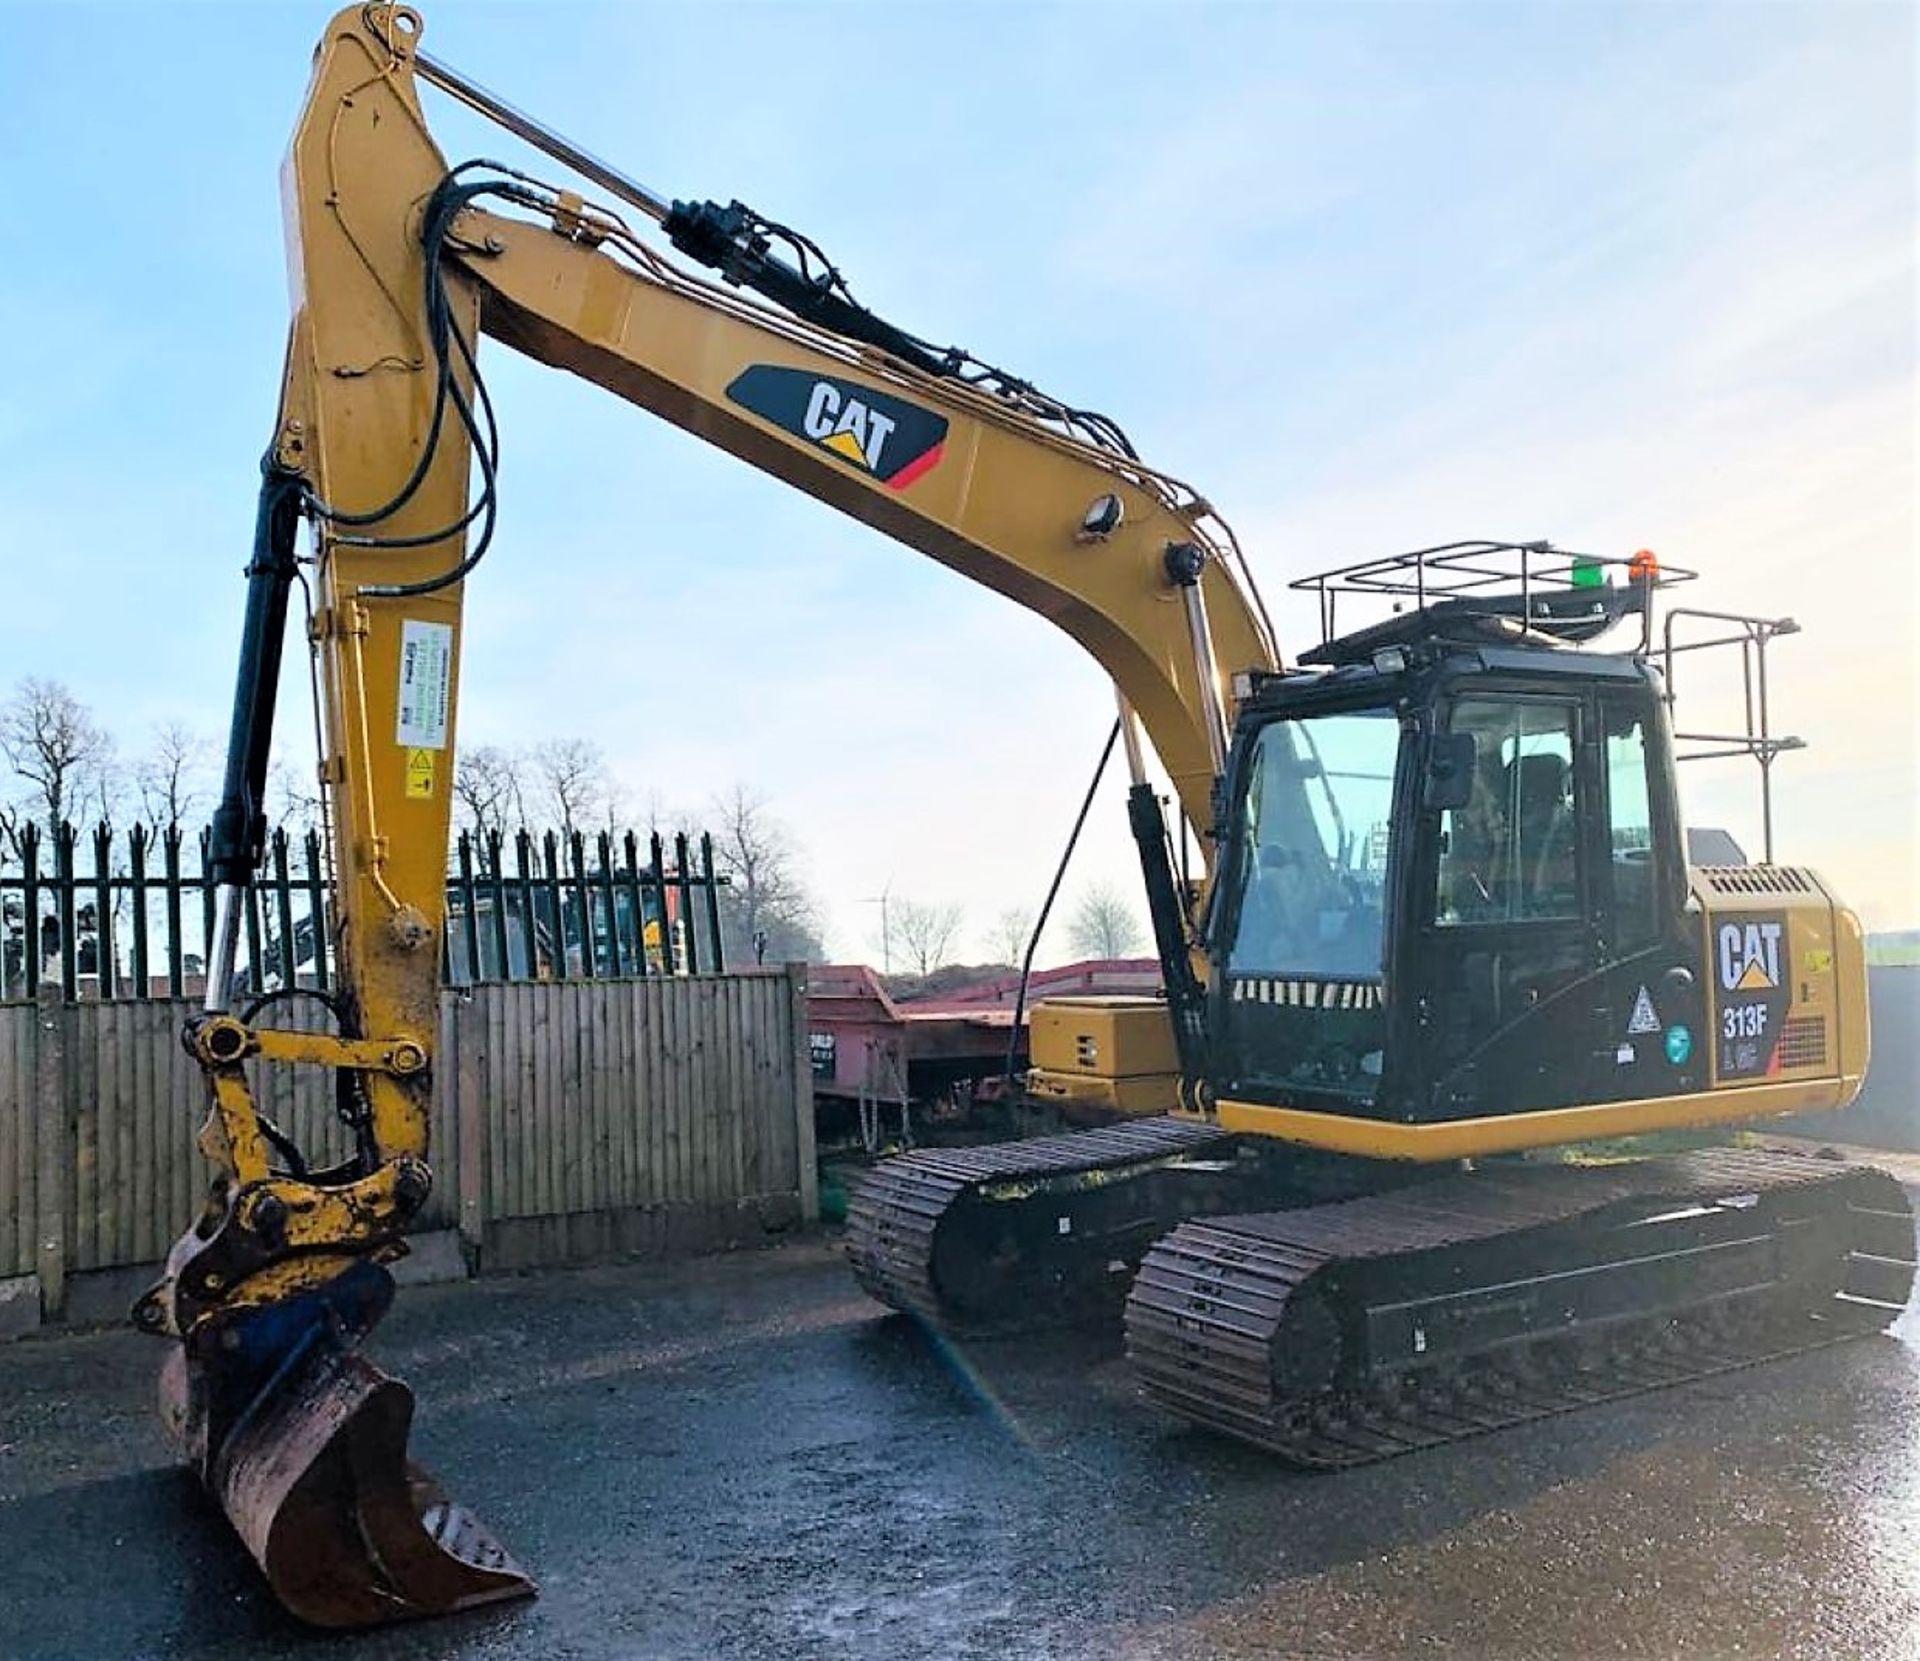 CAT 313 F LGC STEEL TRACKED CRAWLER DIGGER / EXCAVATOR, YEAR 2016, 3445 HOURS, 2 X BUCKETS, AIR CON - Image 3 of 19